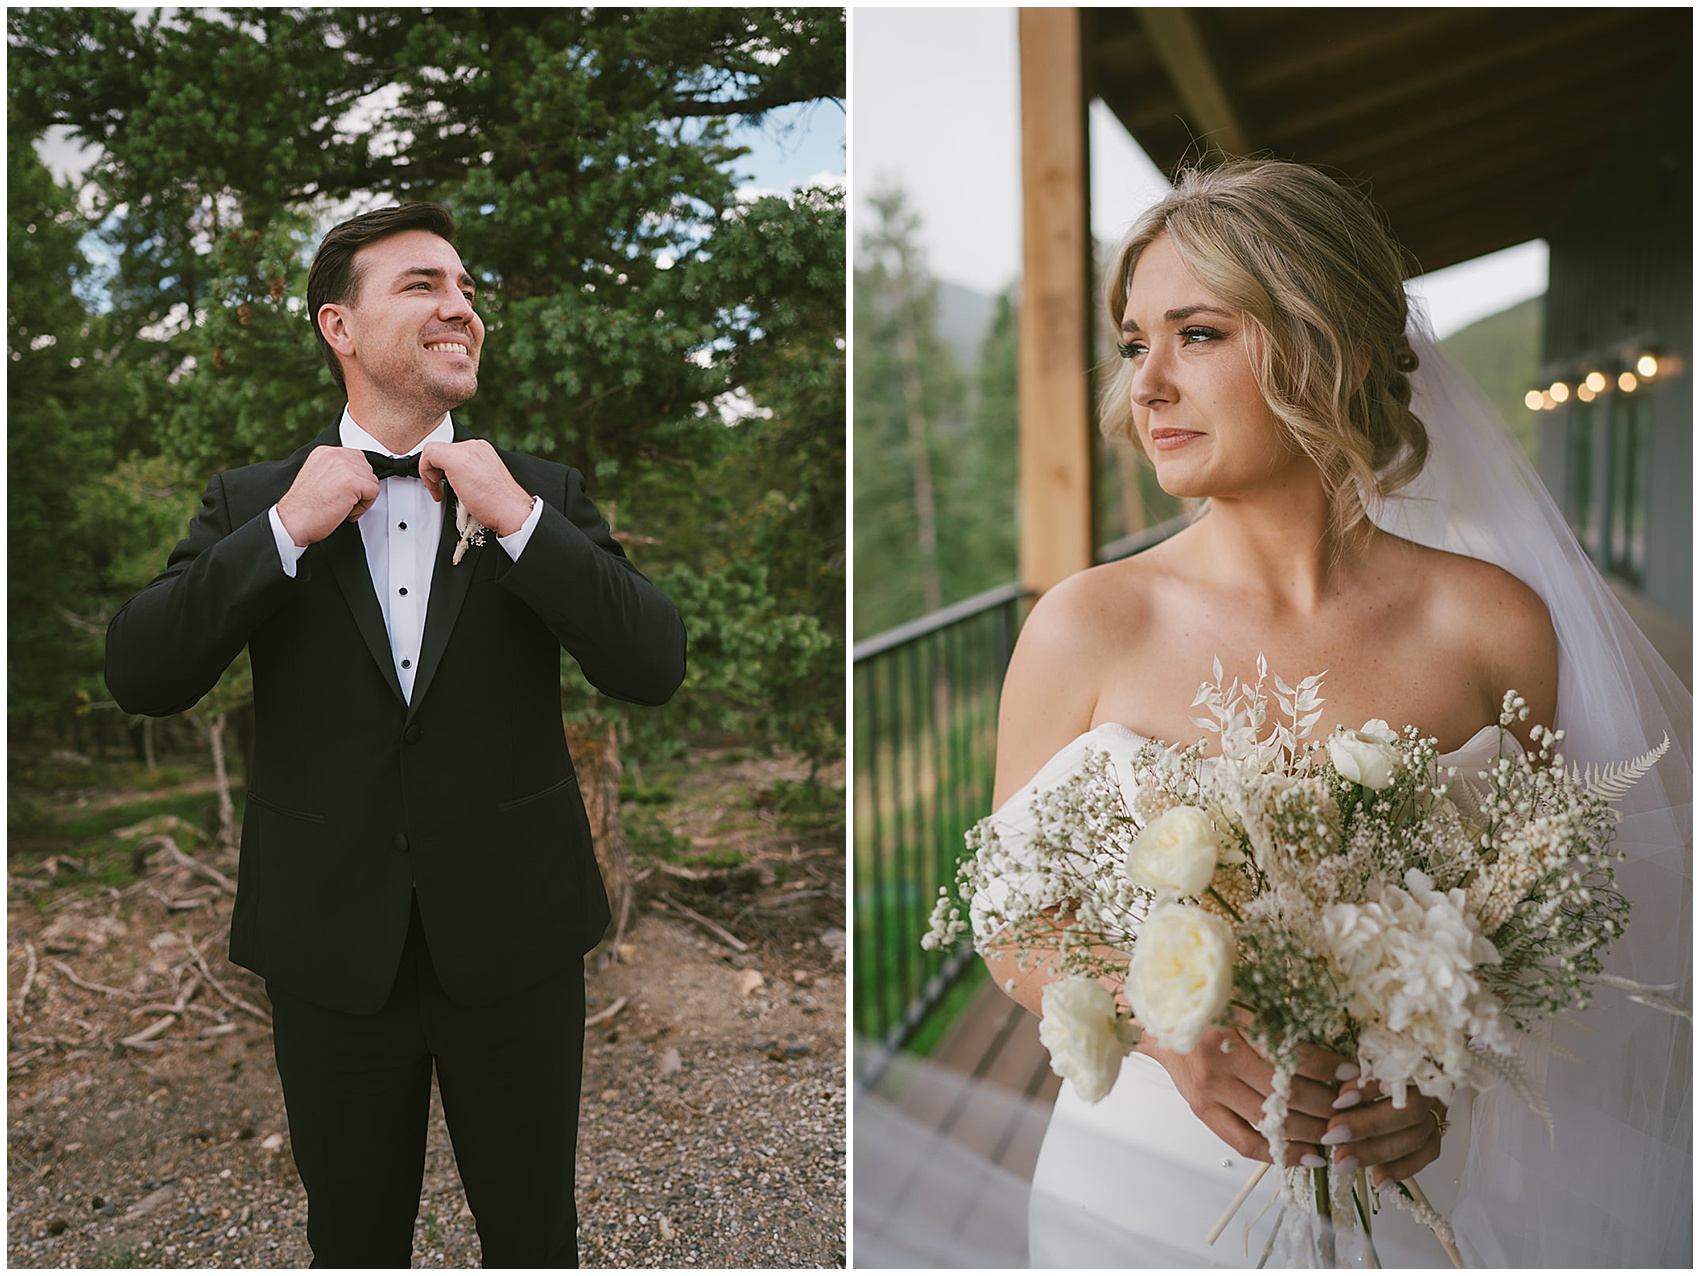 A groom and bride put on their final touches before their wedding